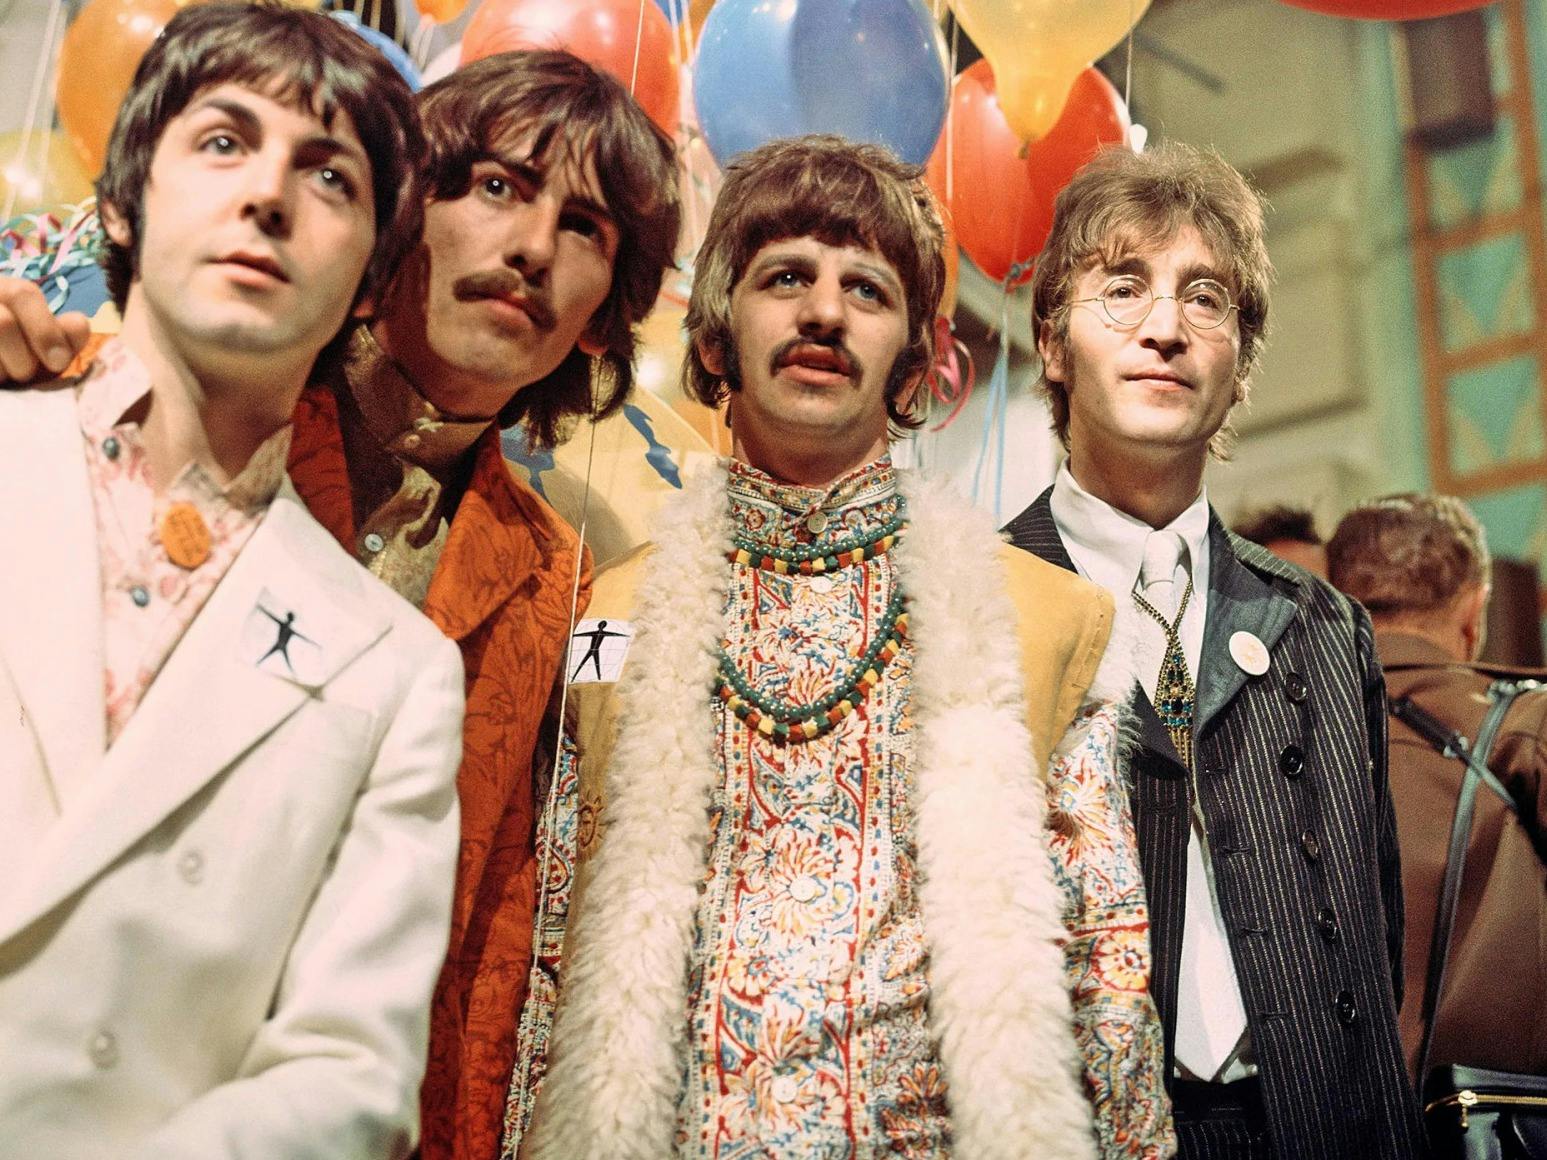 The Beatles in the late 1960s wearing Paisley, shortly after their India trip. (Shutterstock)